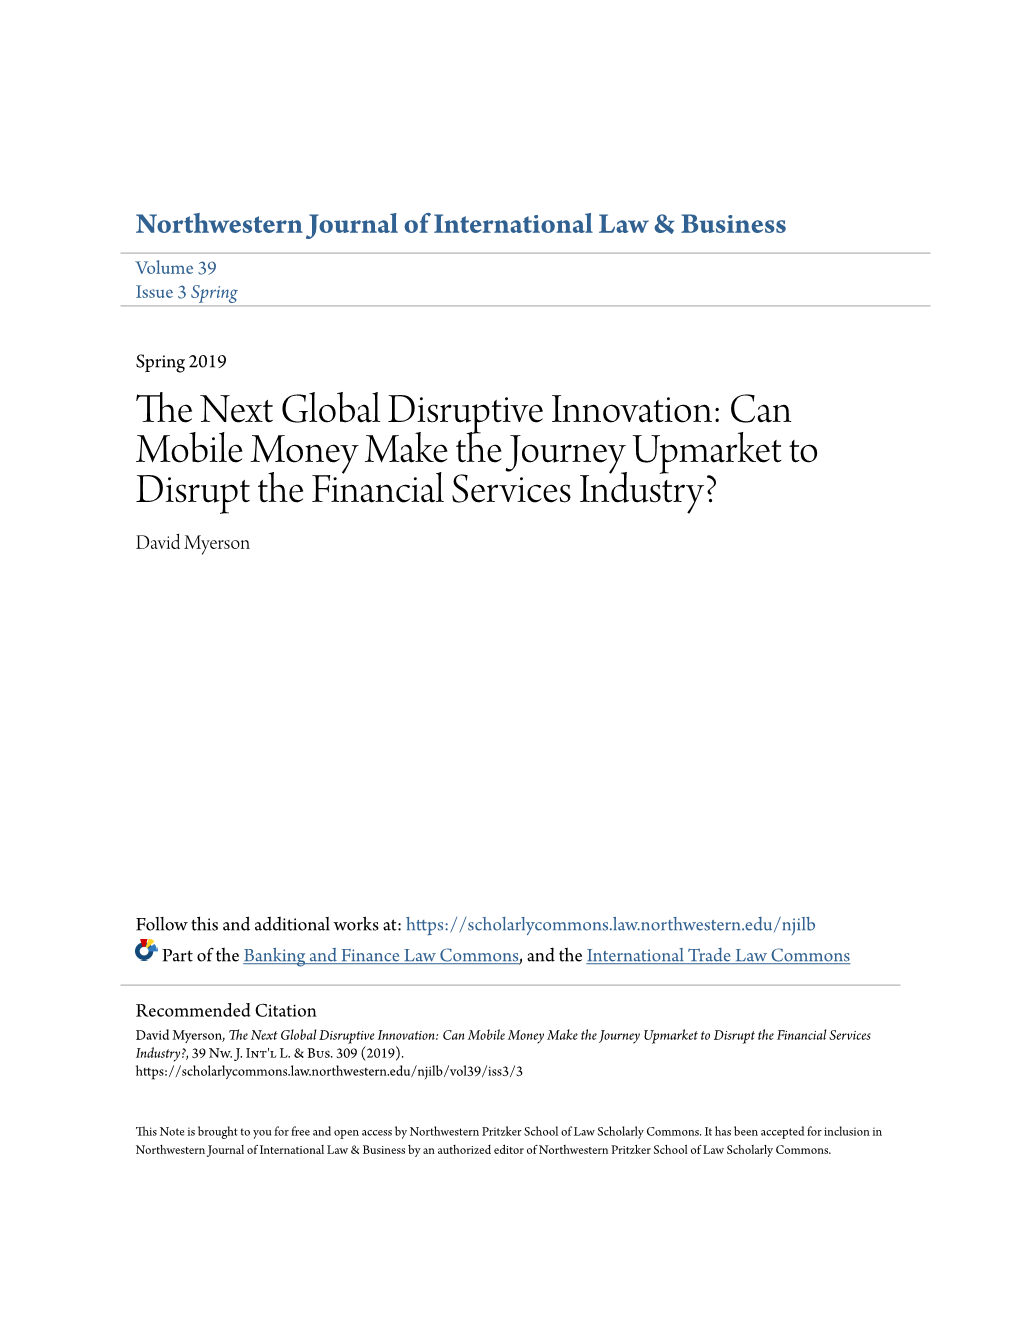 Can Mobile Money Make the Journey Upmarket to Disrupt the Financial Services Industry? David Myerson